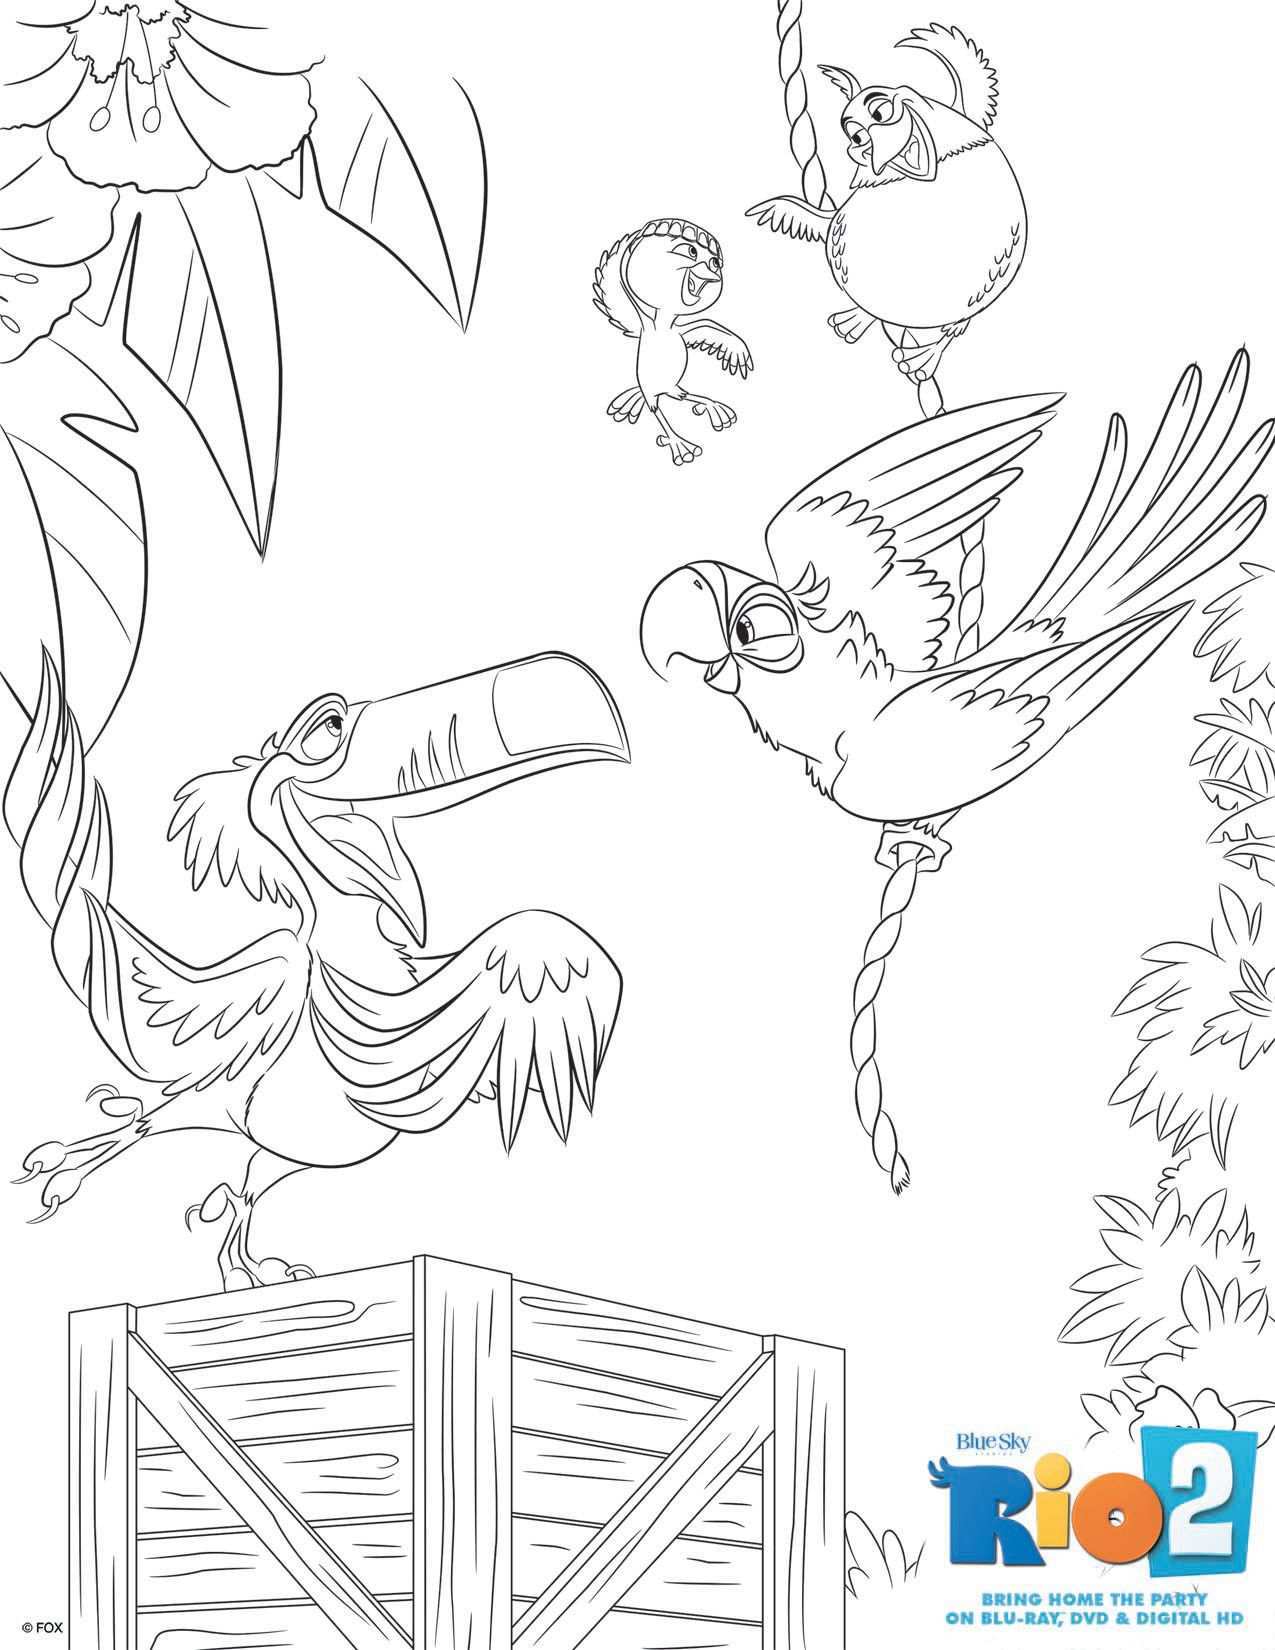 Rio 2 Coloring Pages To Download Part 2 Coloring Pages Cartoon Coloring Pages Disney